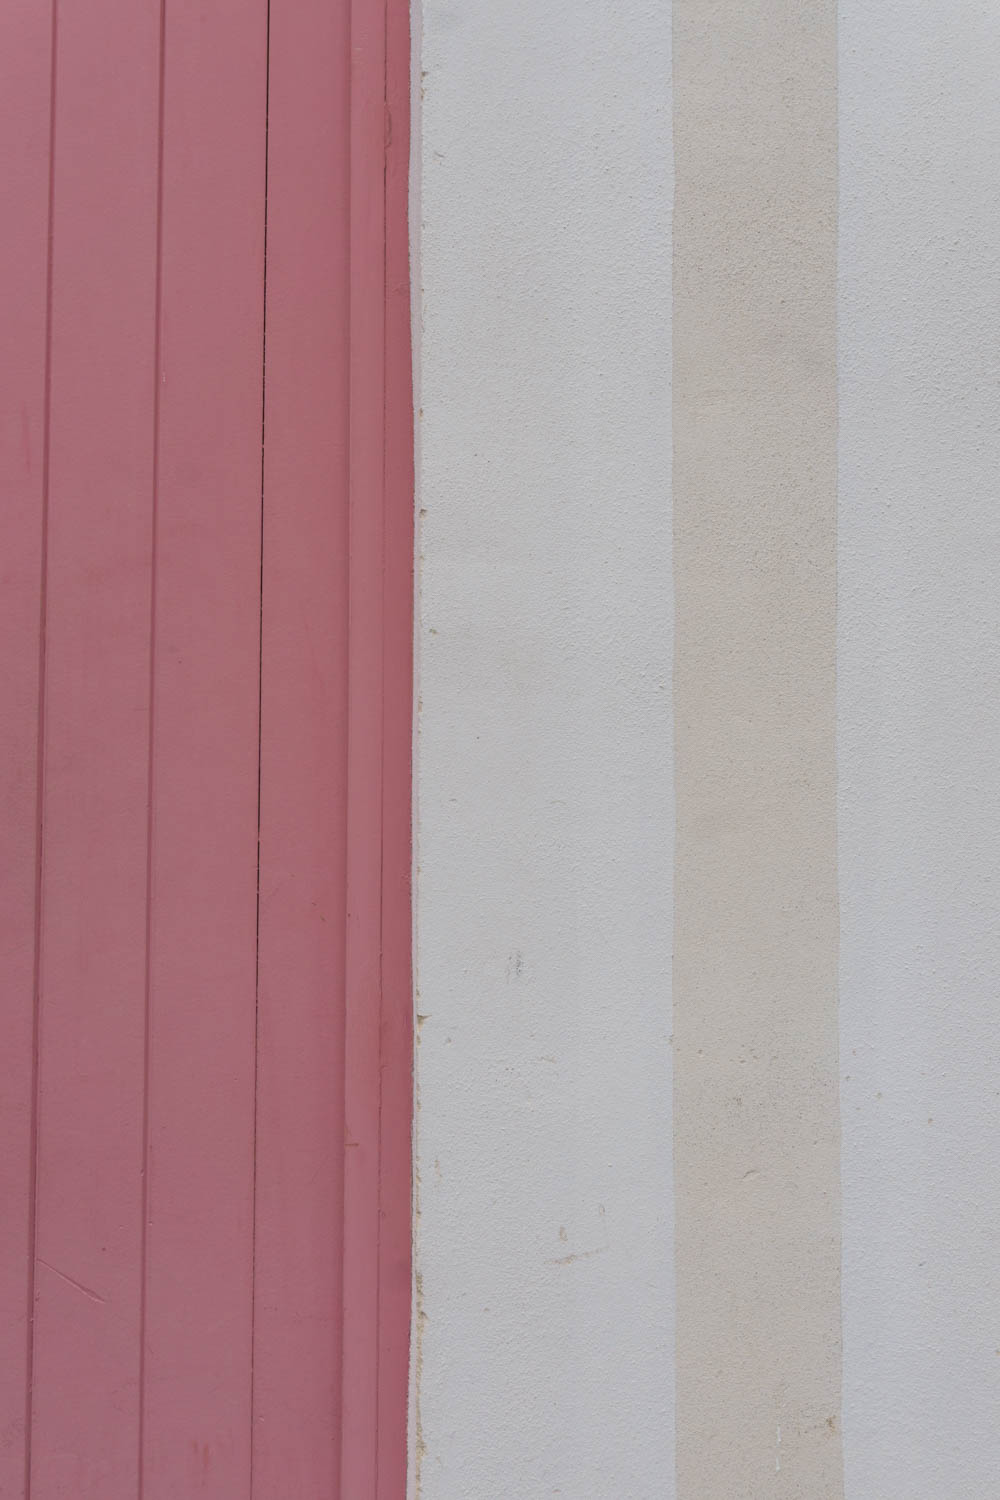 Pink Door - French Country Colors, Burgundy France - RG Daily Blog